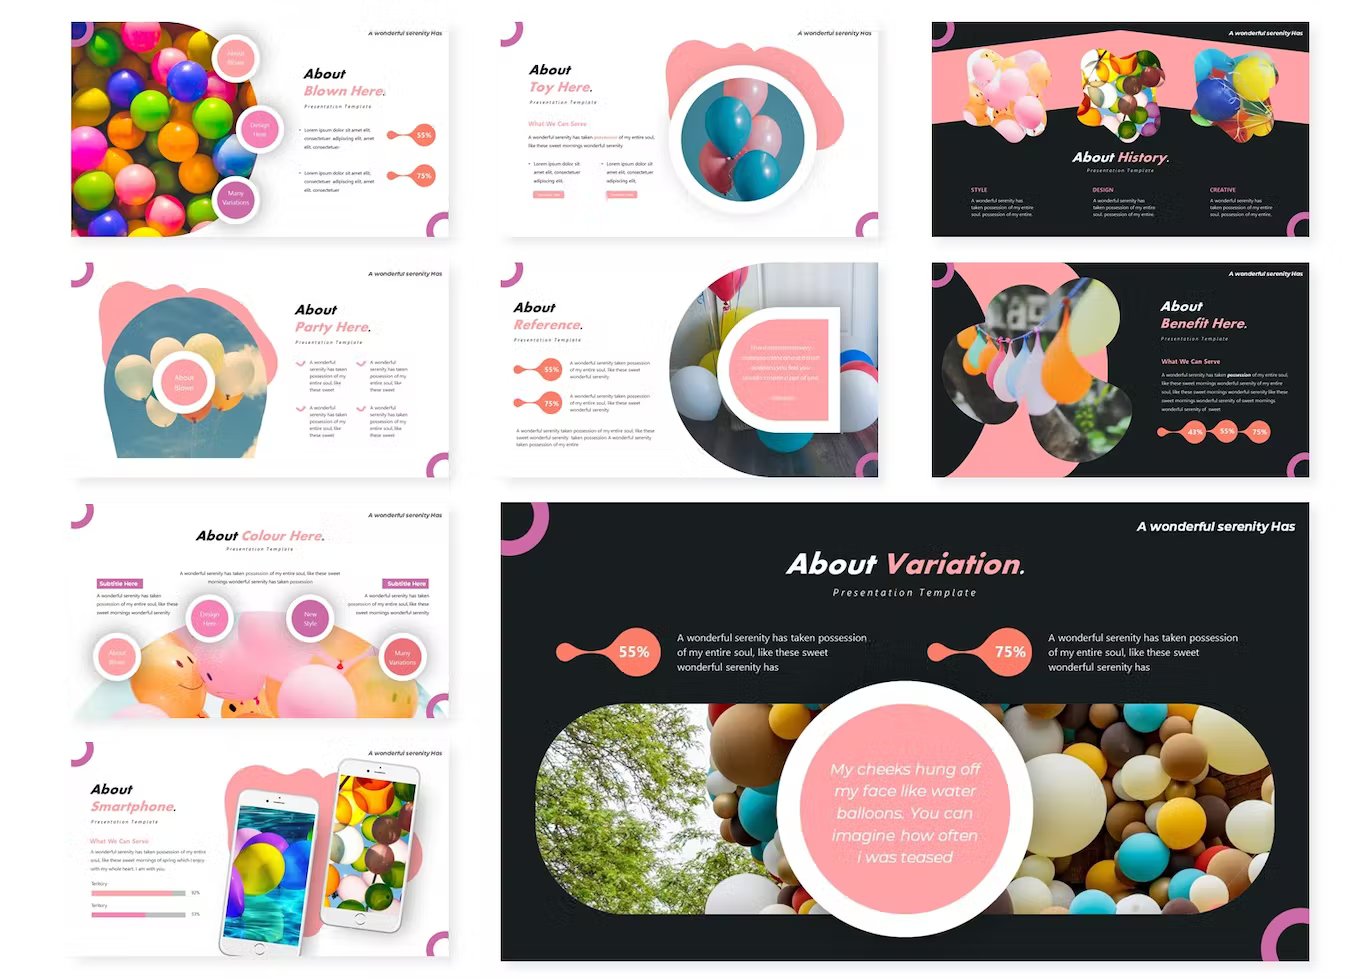 A set of 9 different the balloons powerpoint templates in pink, white, blue and black on a white background.